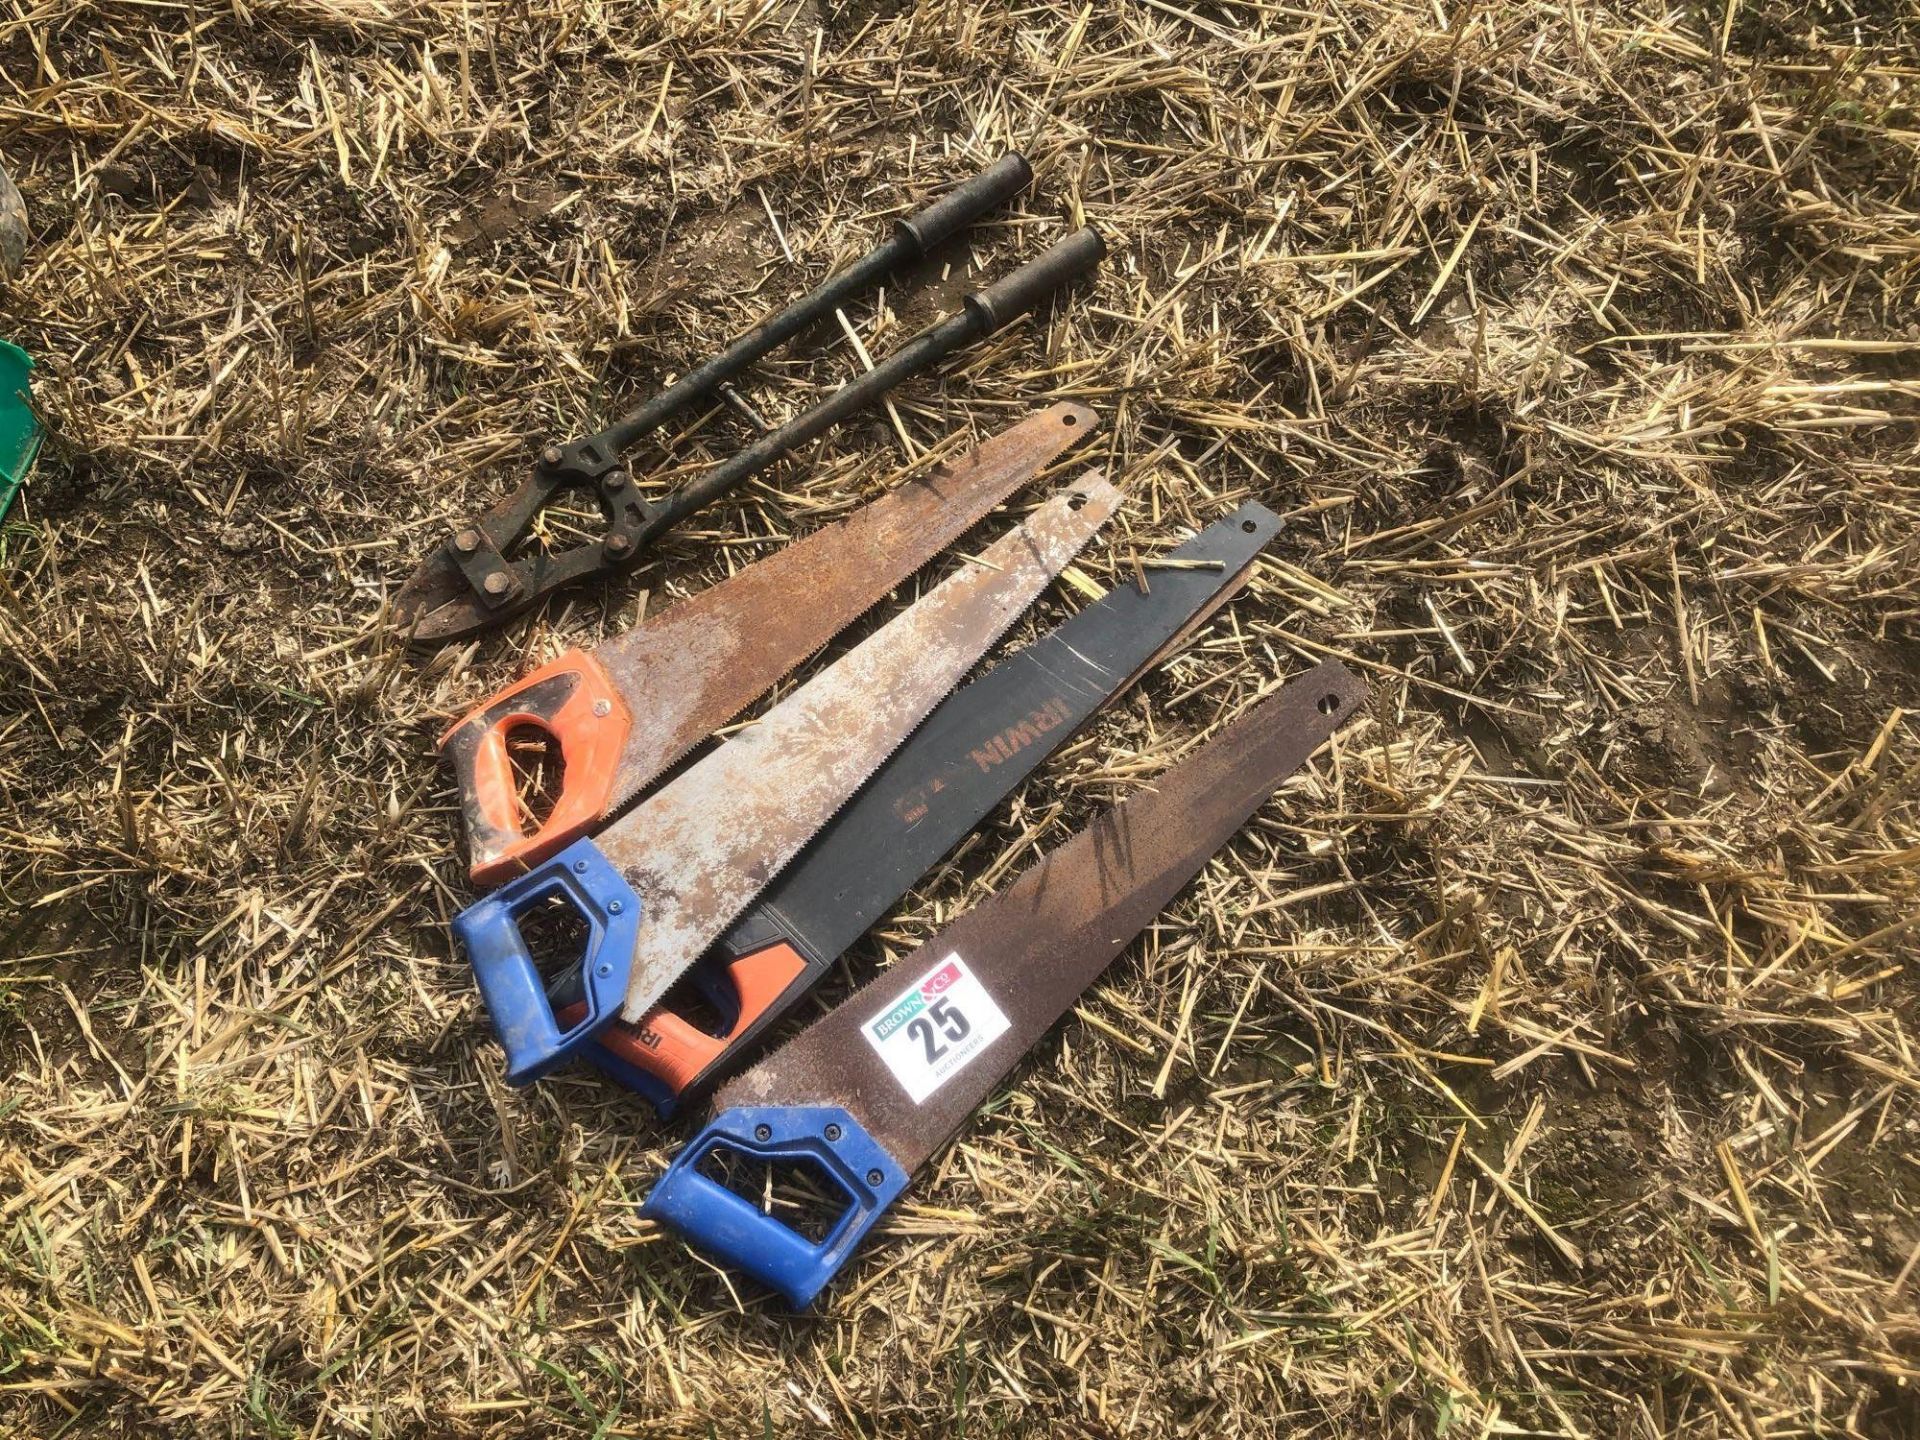 Quantity hand saws and bolt croppers